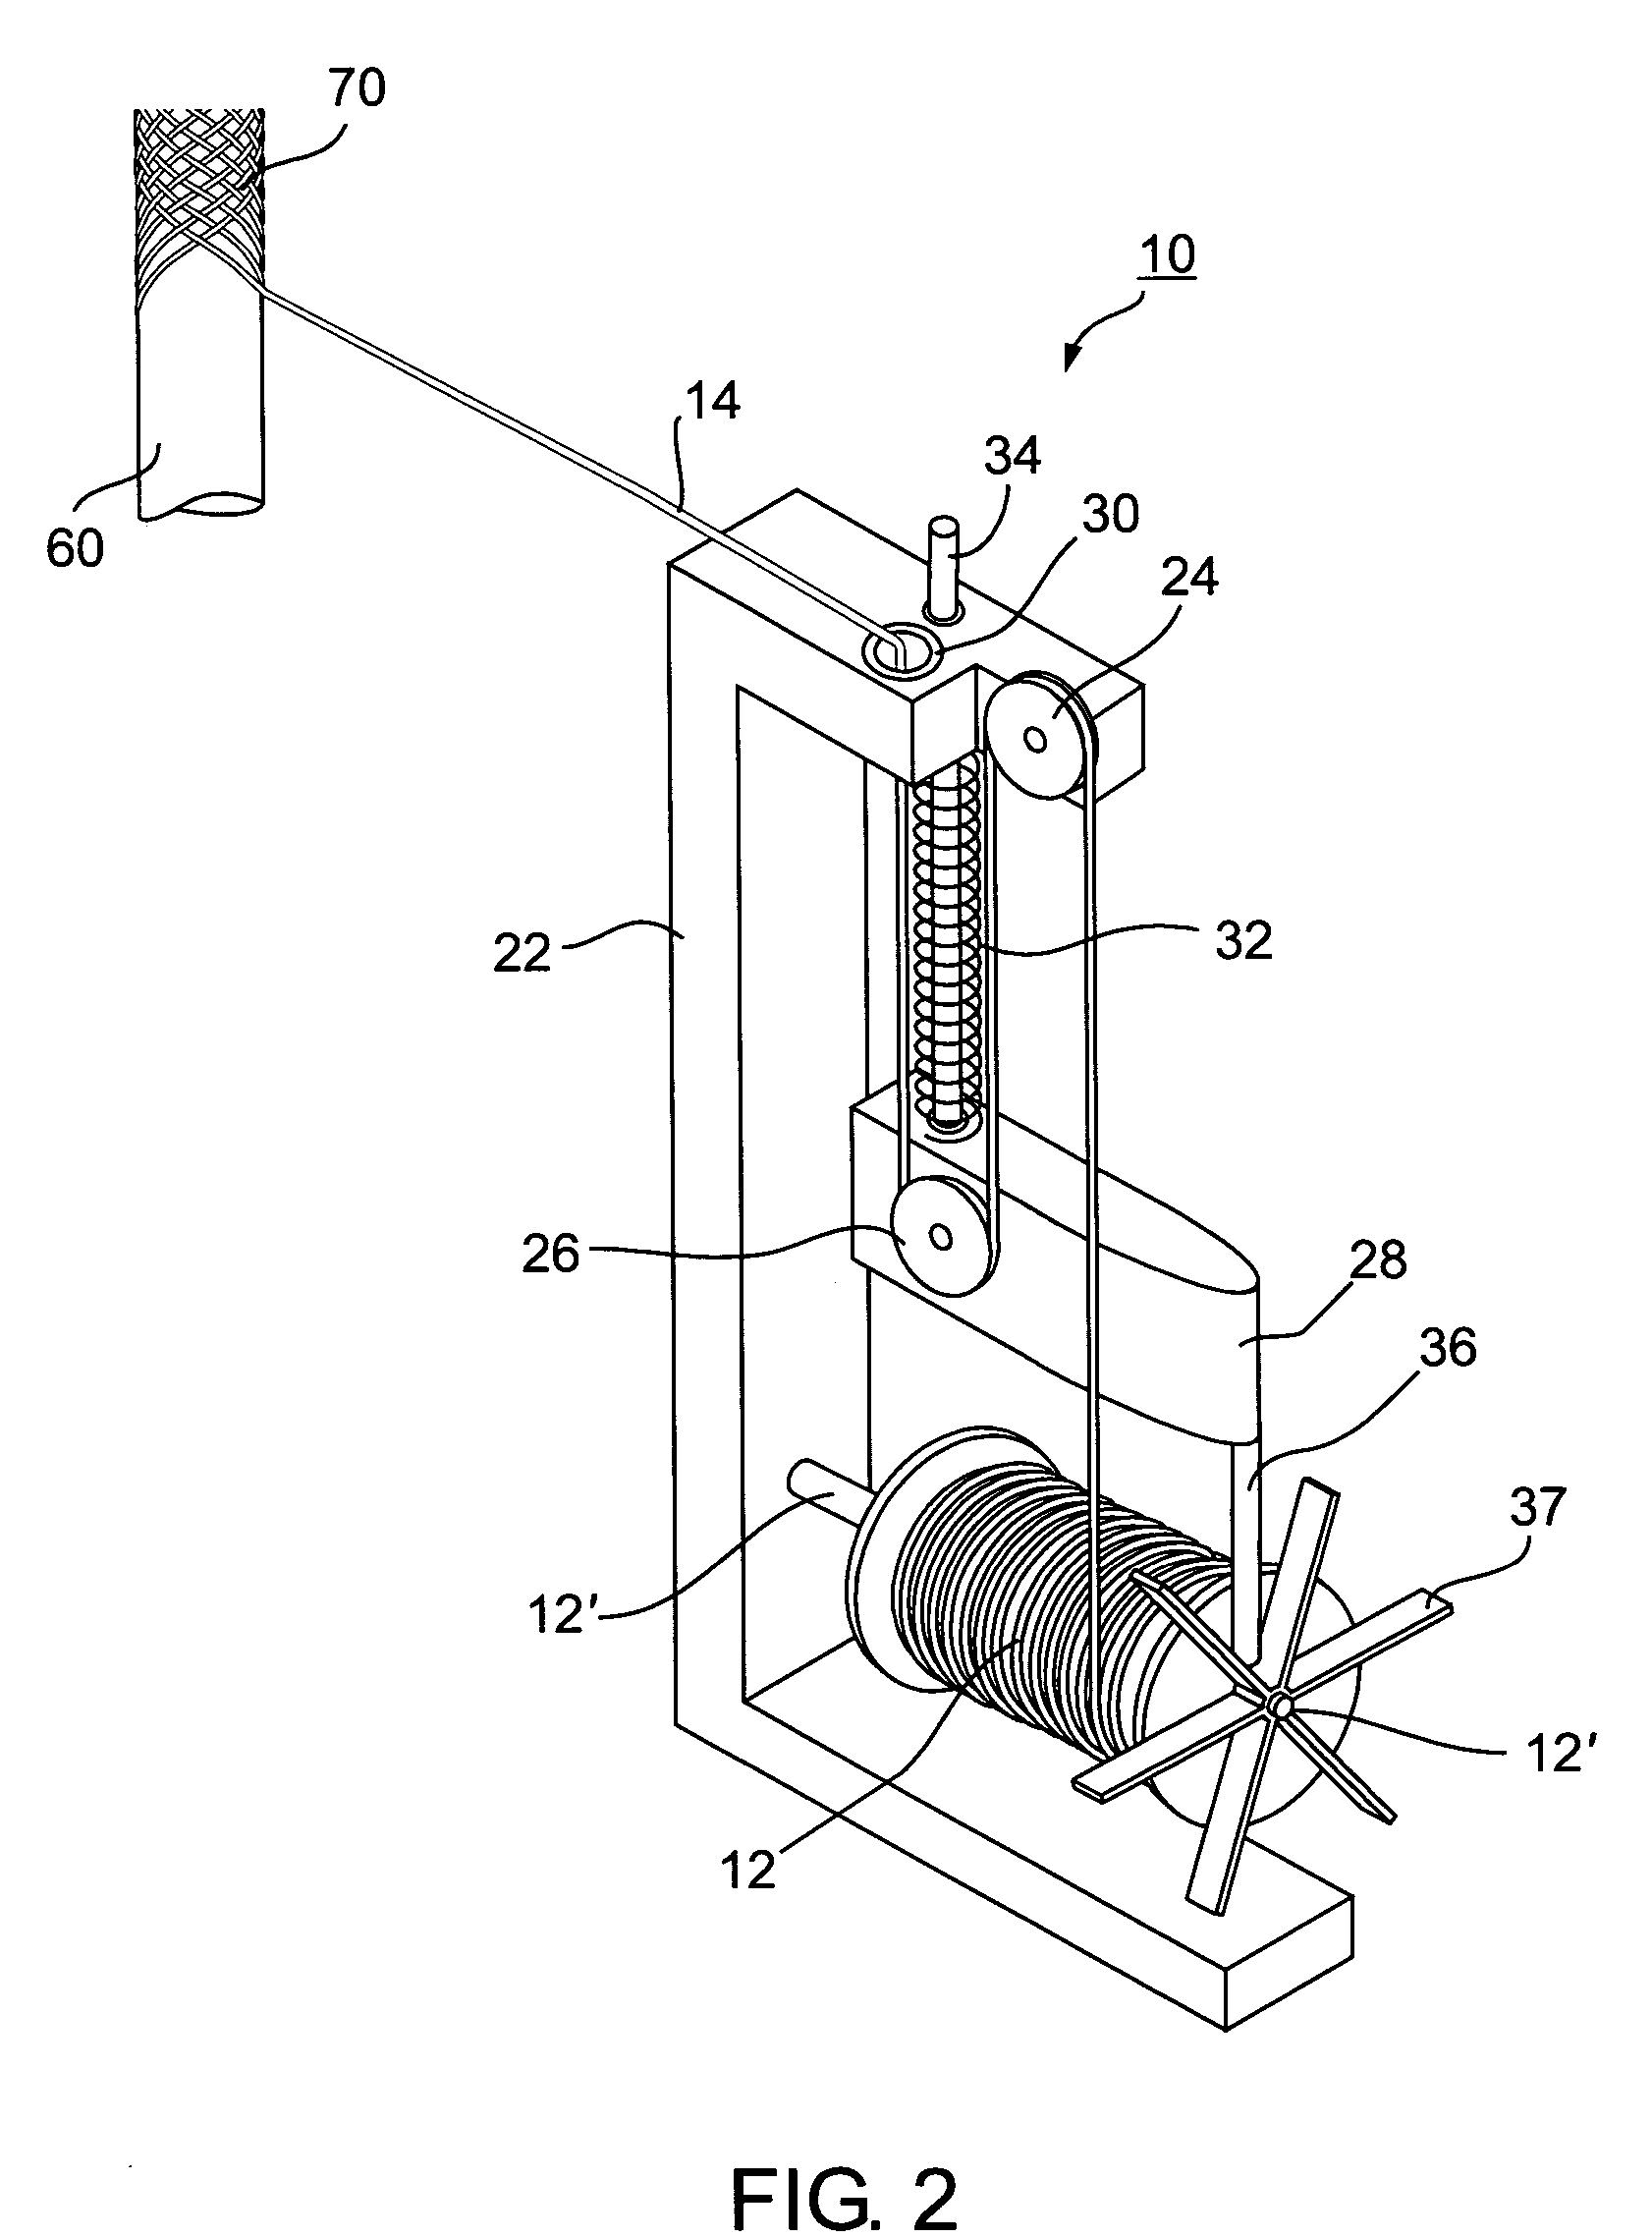 Method and apparatus for making intraluminal implants and construction particularly useful in such method and apparatus